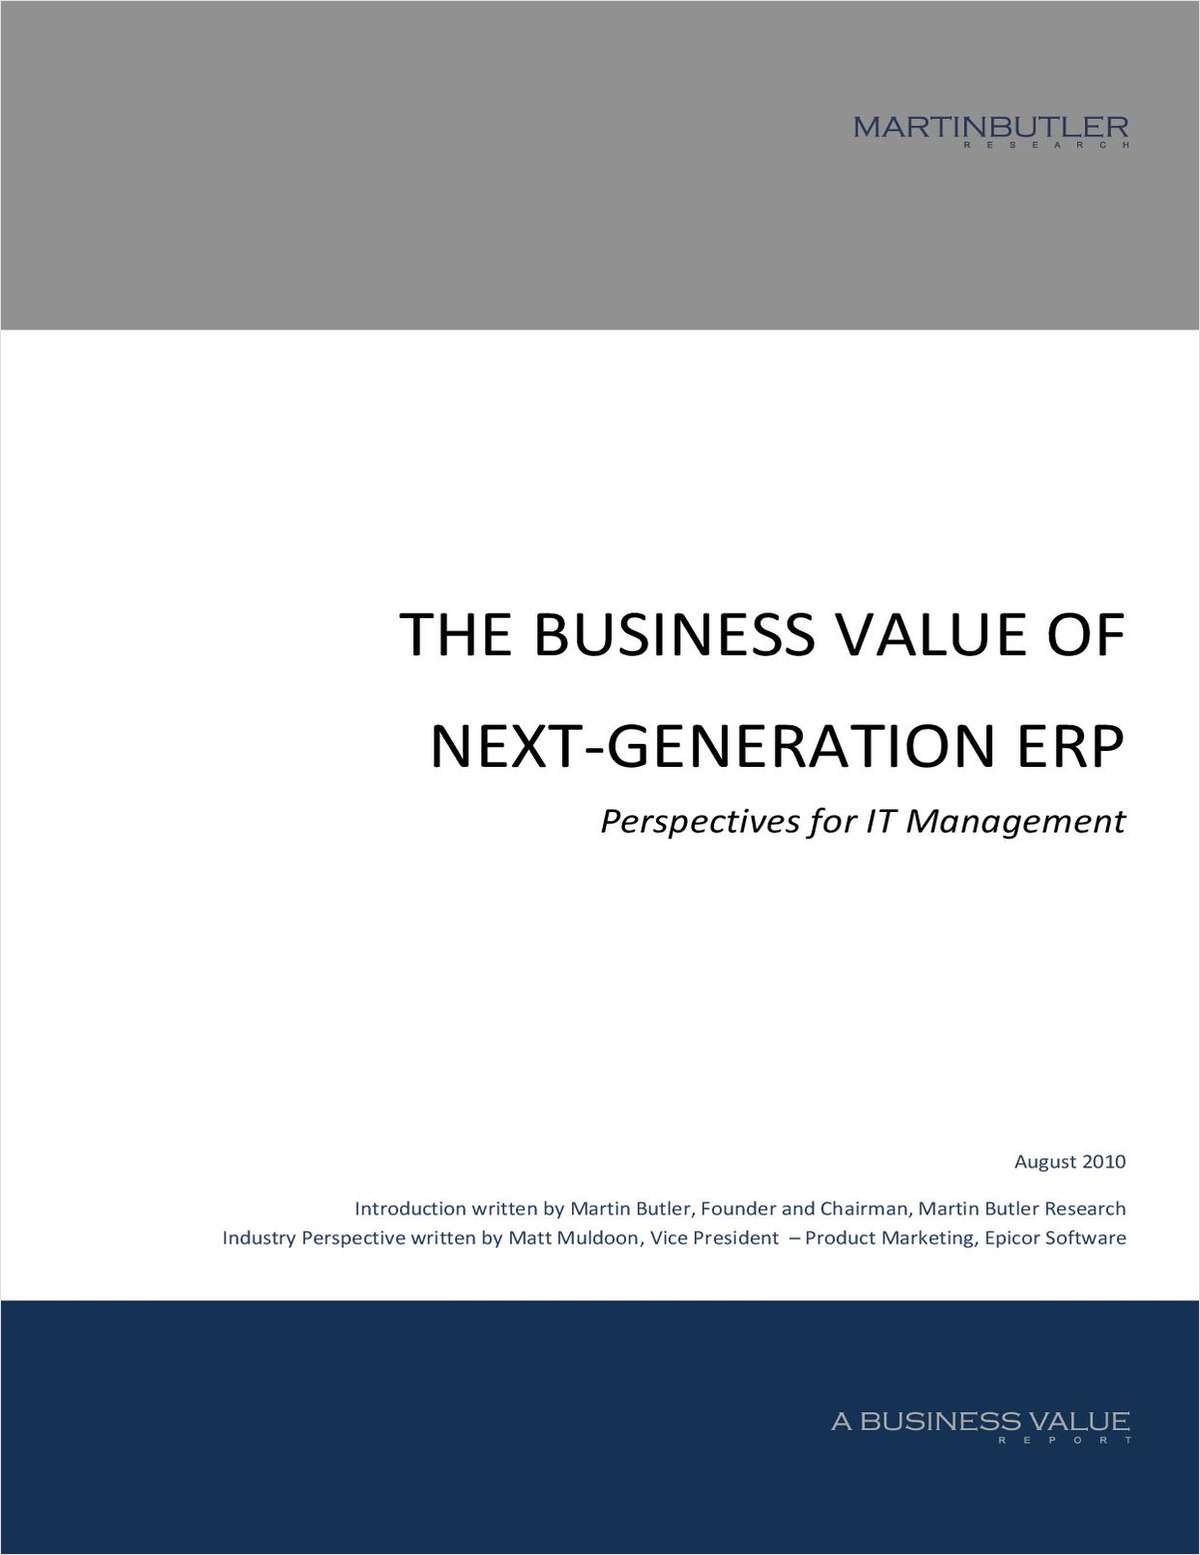 The Business Value of Next-Generation ERP: Perspectives for IT Management in Manufacturing